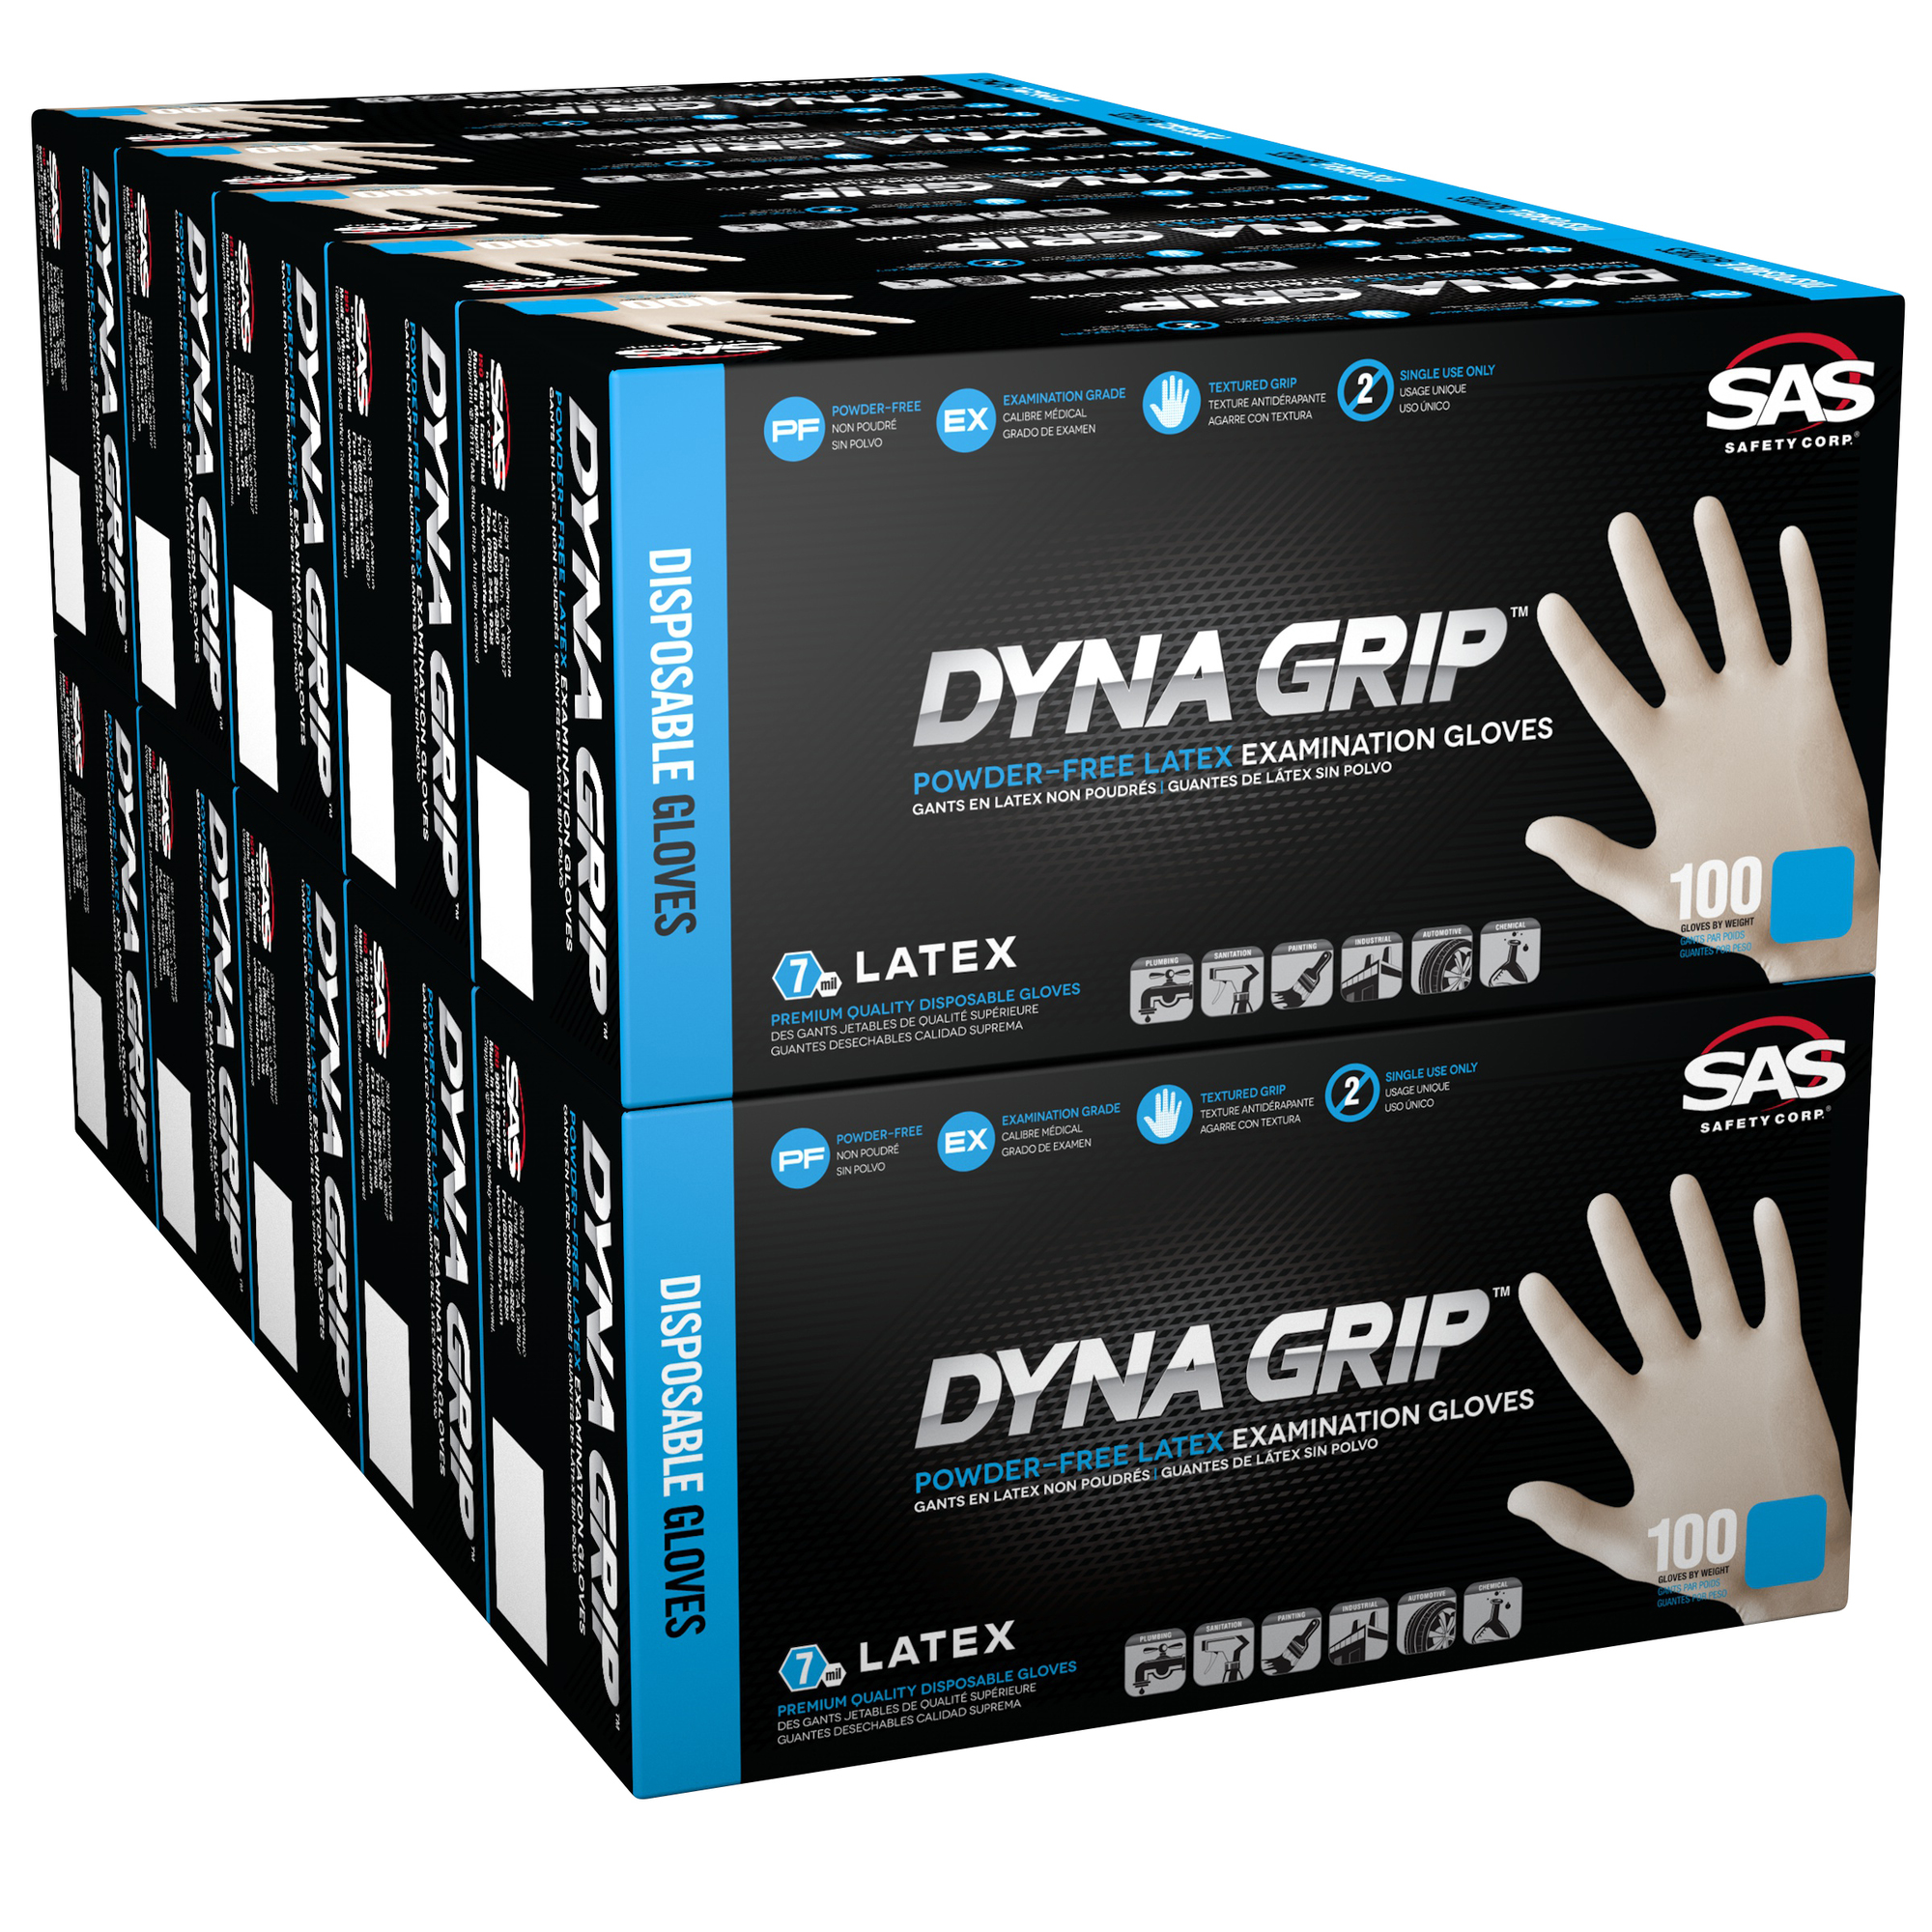 Dyna-Grip, Case of Dyna Grip PF Exam Latex 7 mil 1000 Glove, Size 2XL, Color White, Included (qty.) 1000 Model 650-1005CASE